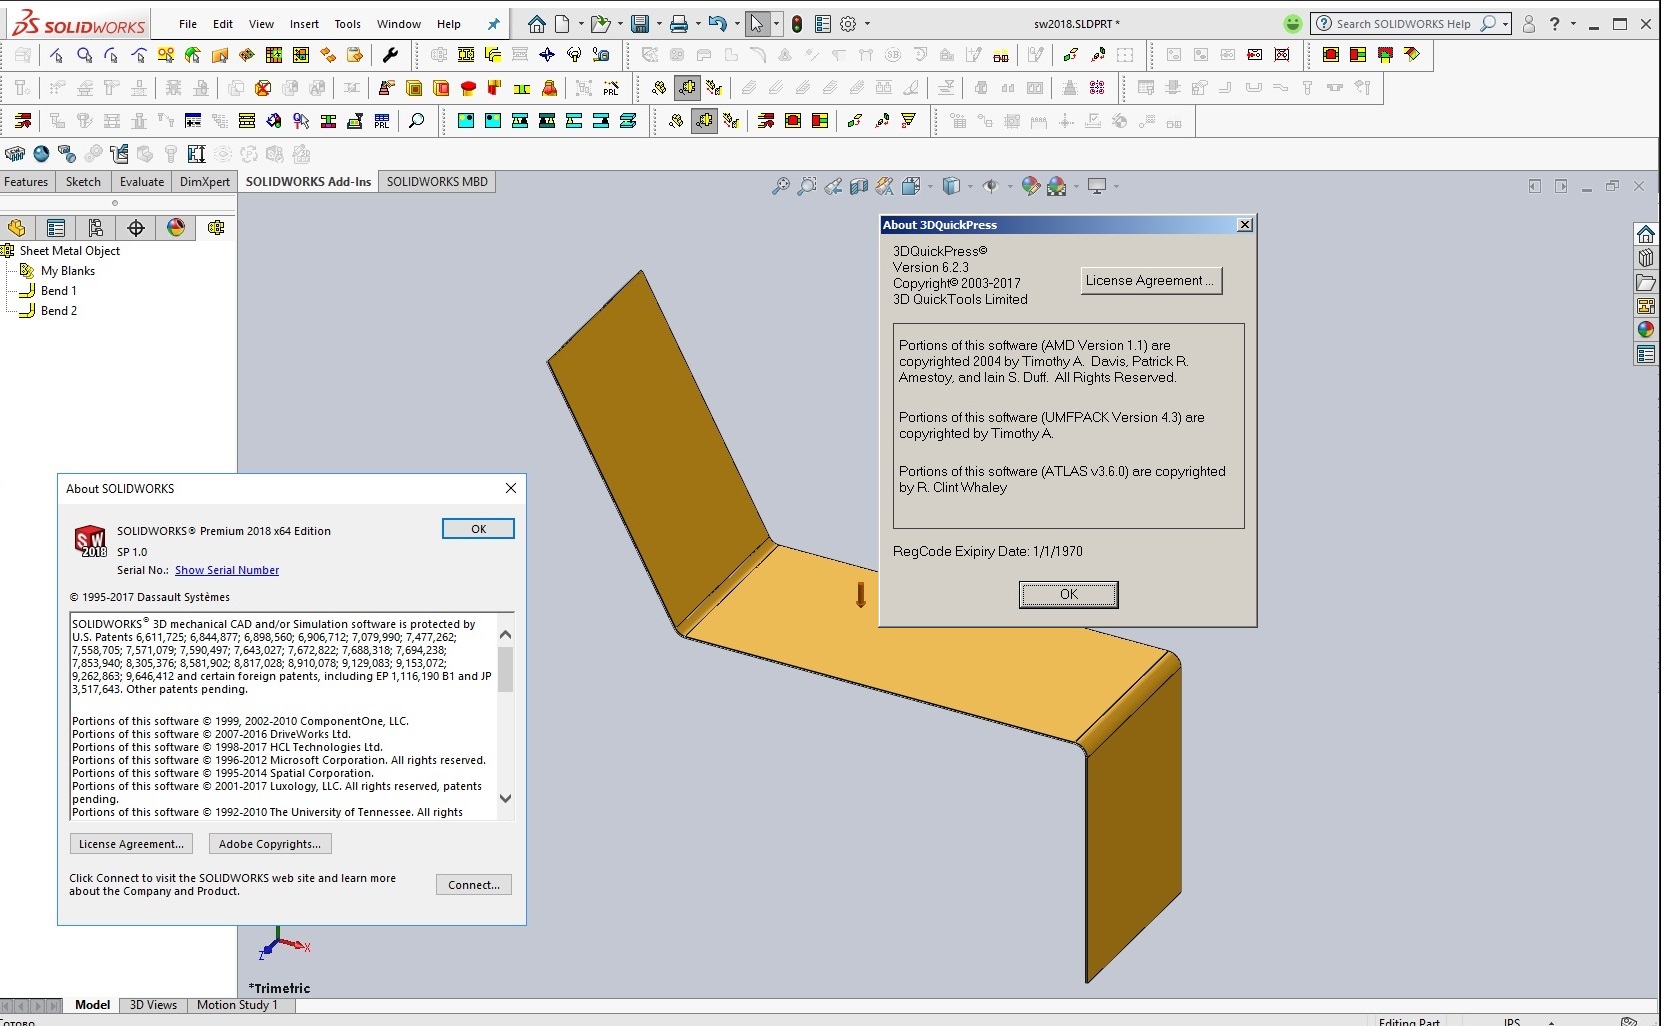 Working with 3DQuickPress v6.2.3 HotFix only for SolidWorks 2011-2018